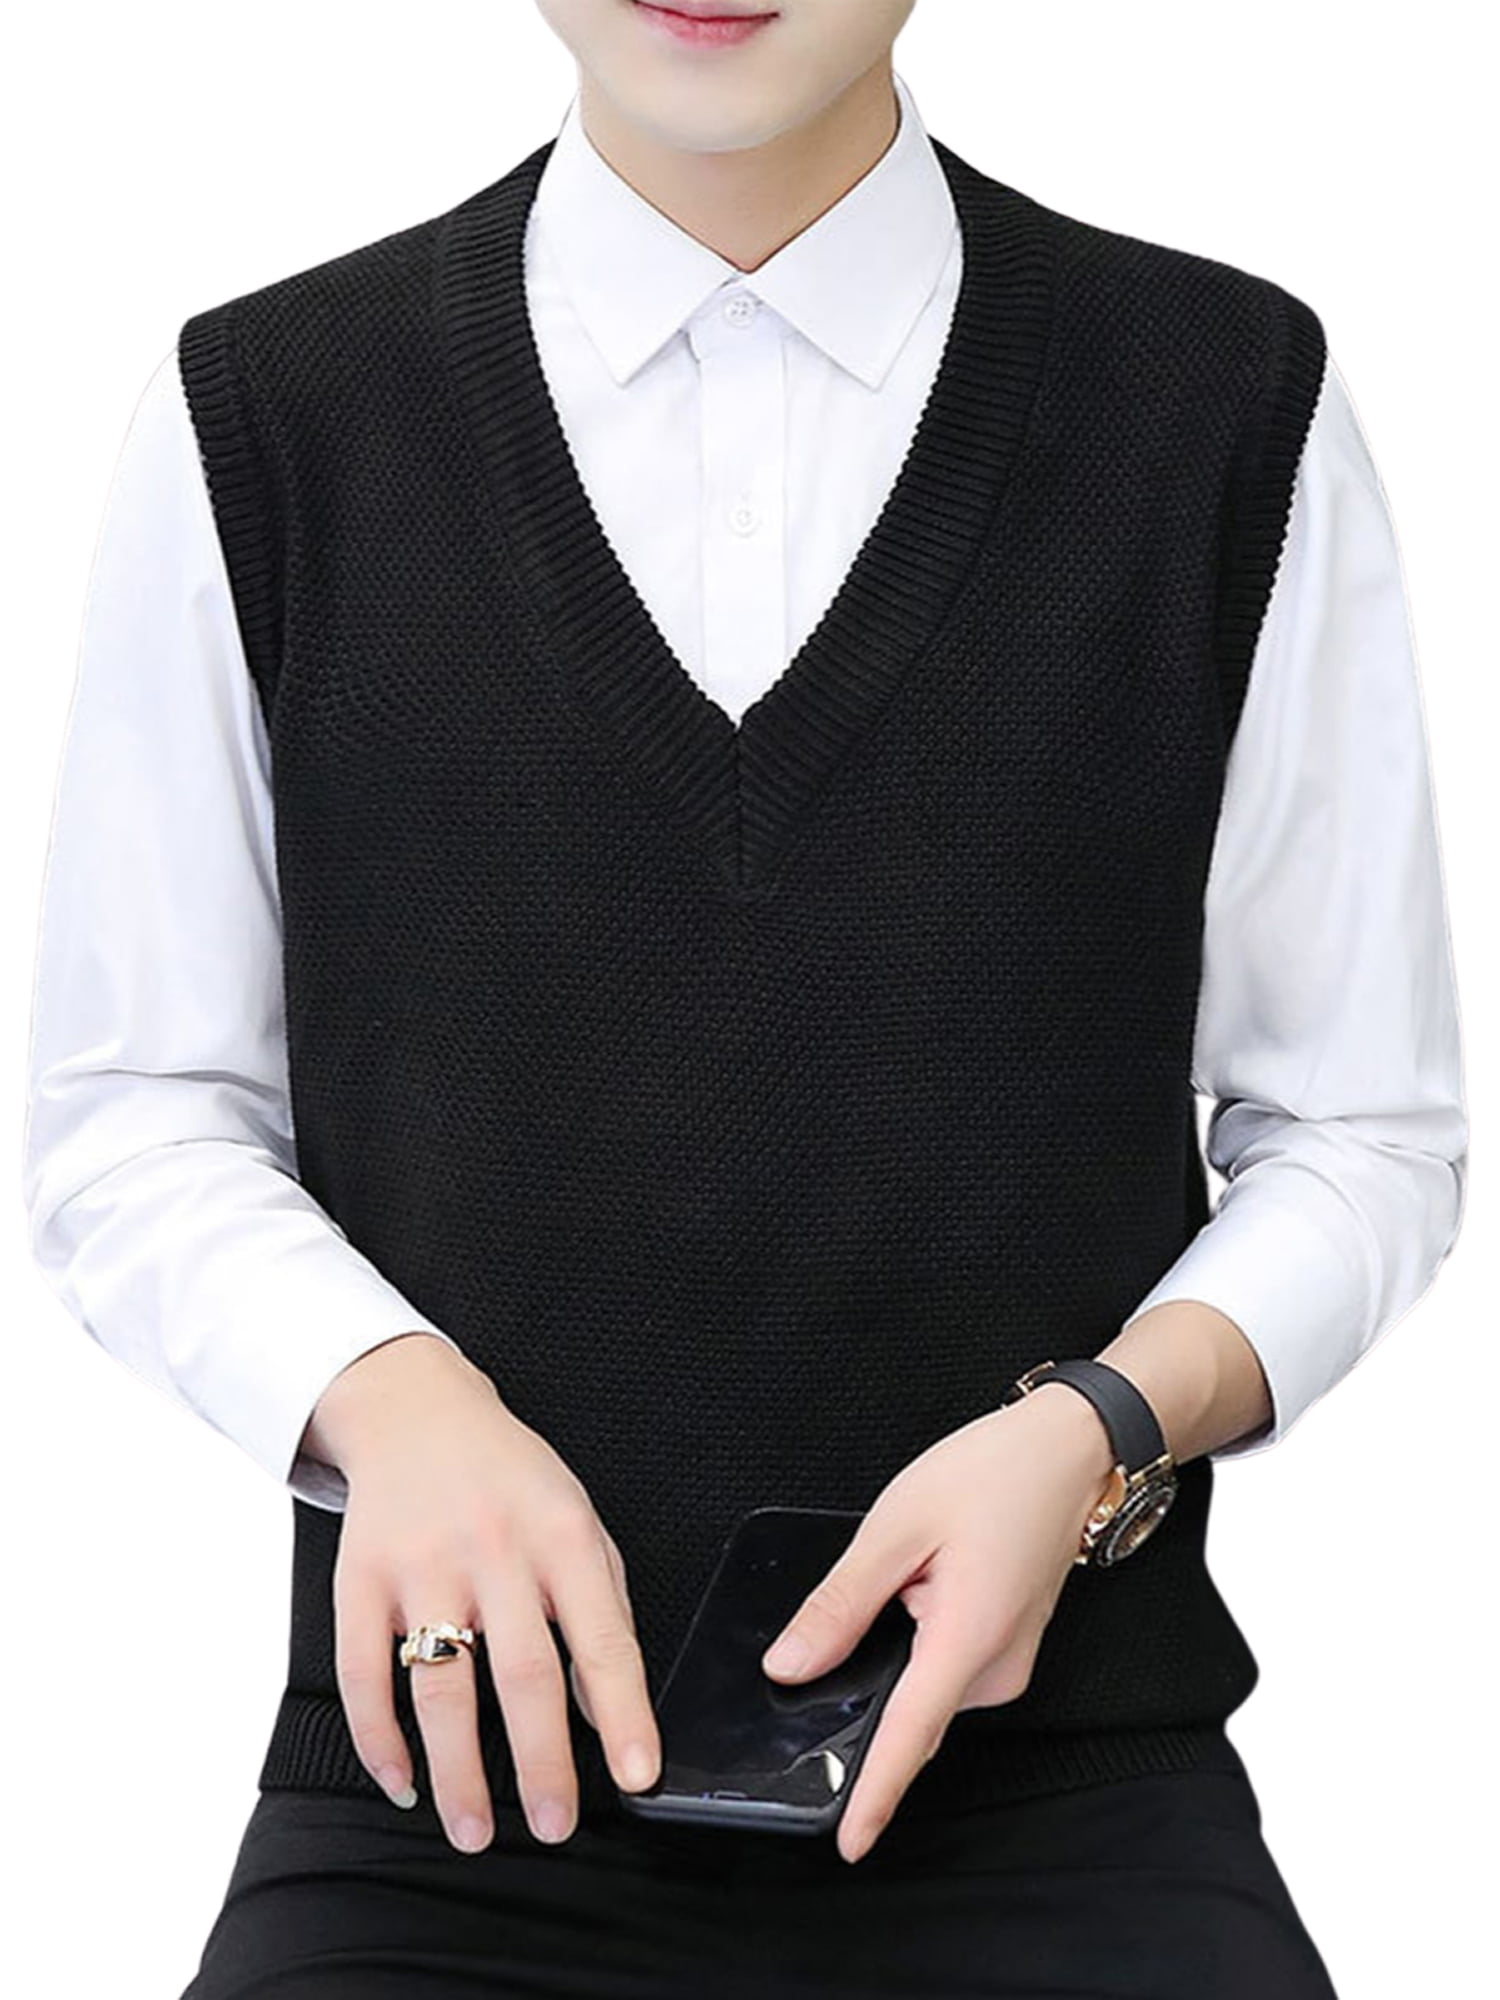 New Baby Kids Boys Waistcoat V-Neck Sleeveless Knitted Sweater Vest Uniform Pullover Top Autumn Clothes Solid Color 